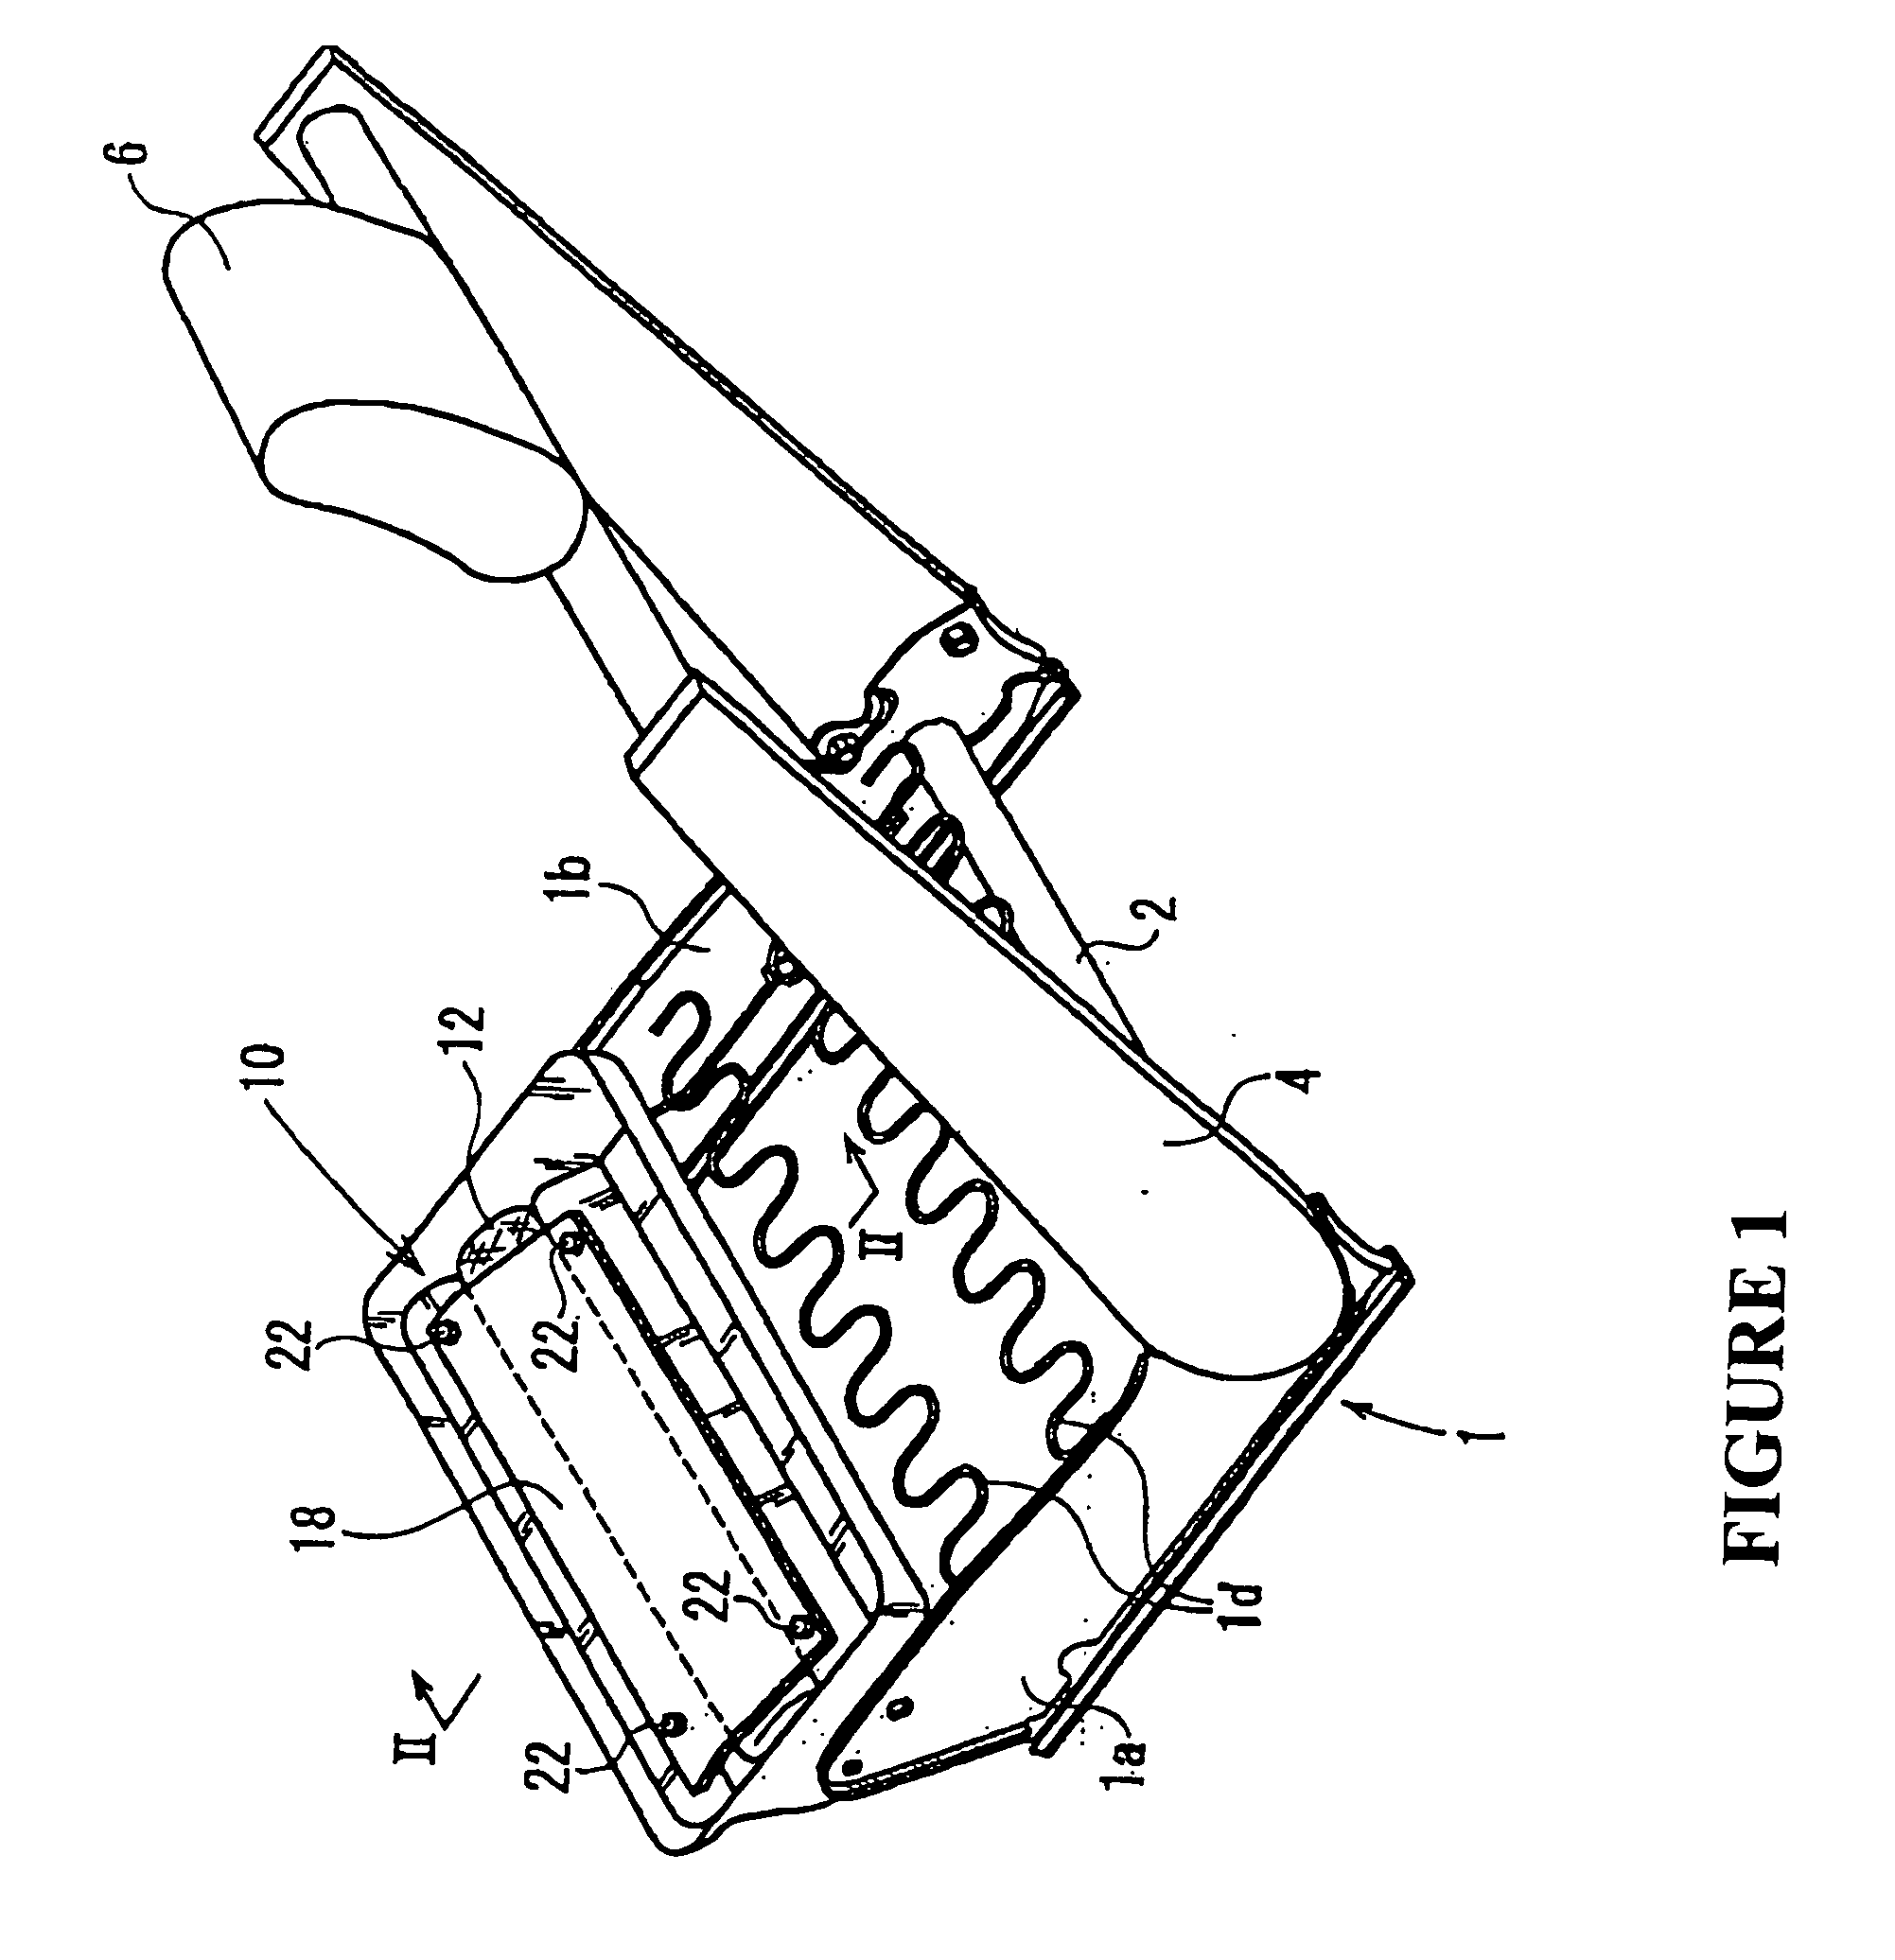 Passenger protecting device